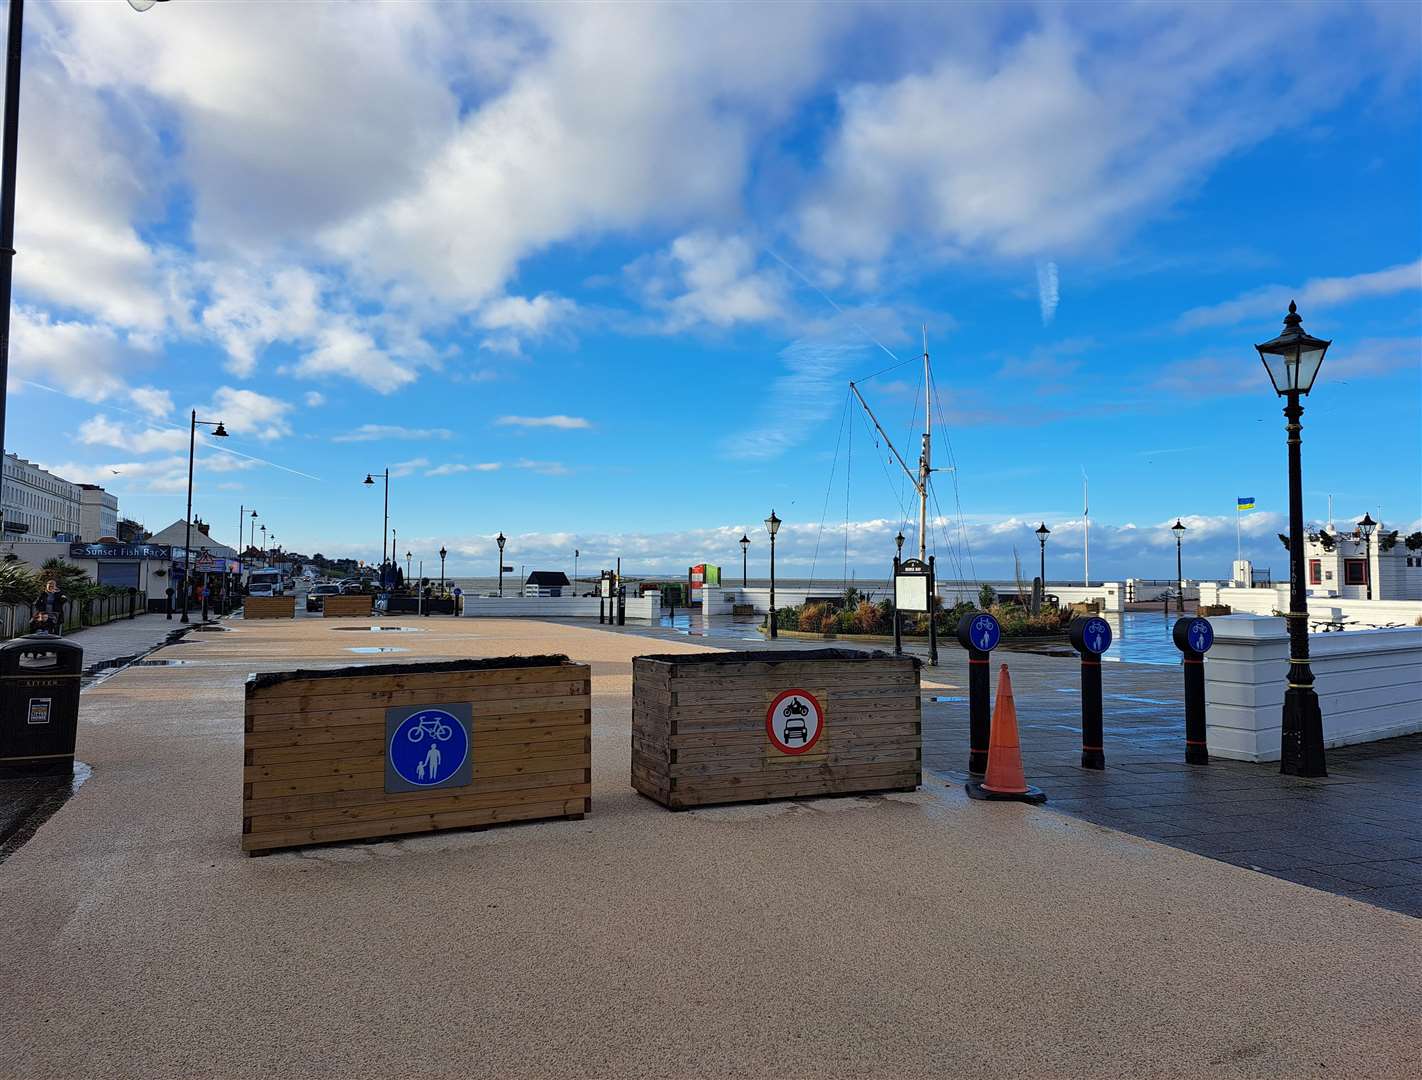 The newly installed plaza has resulted in the permanent closure of a section of Central Parade, Herne Bay